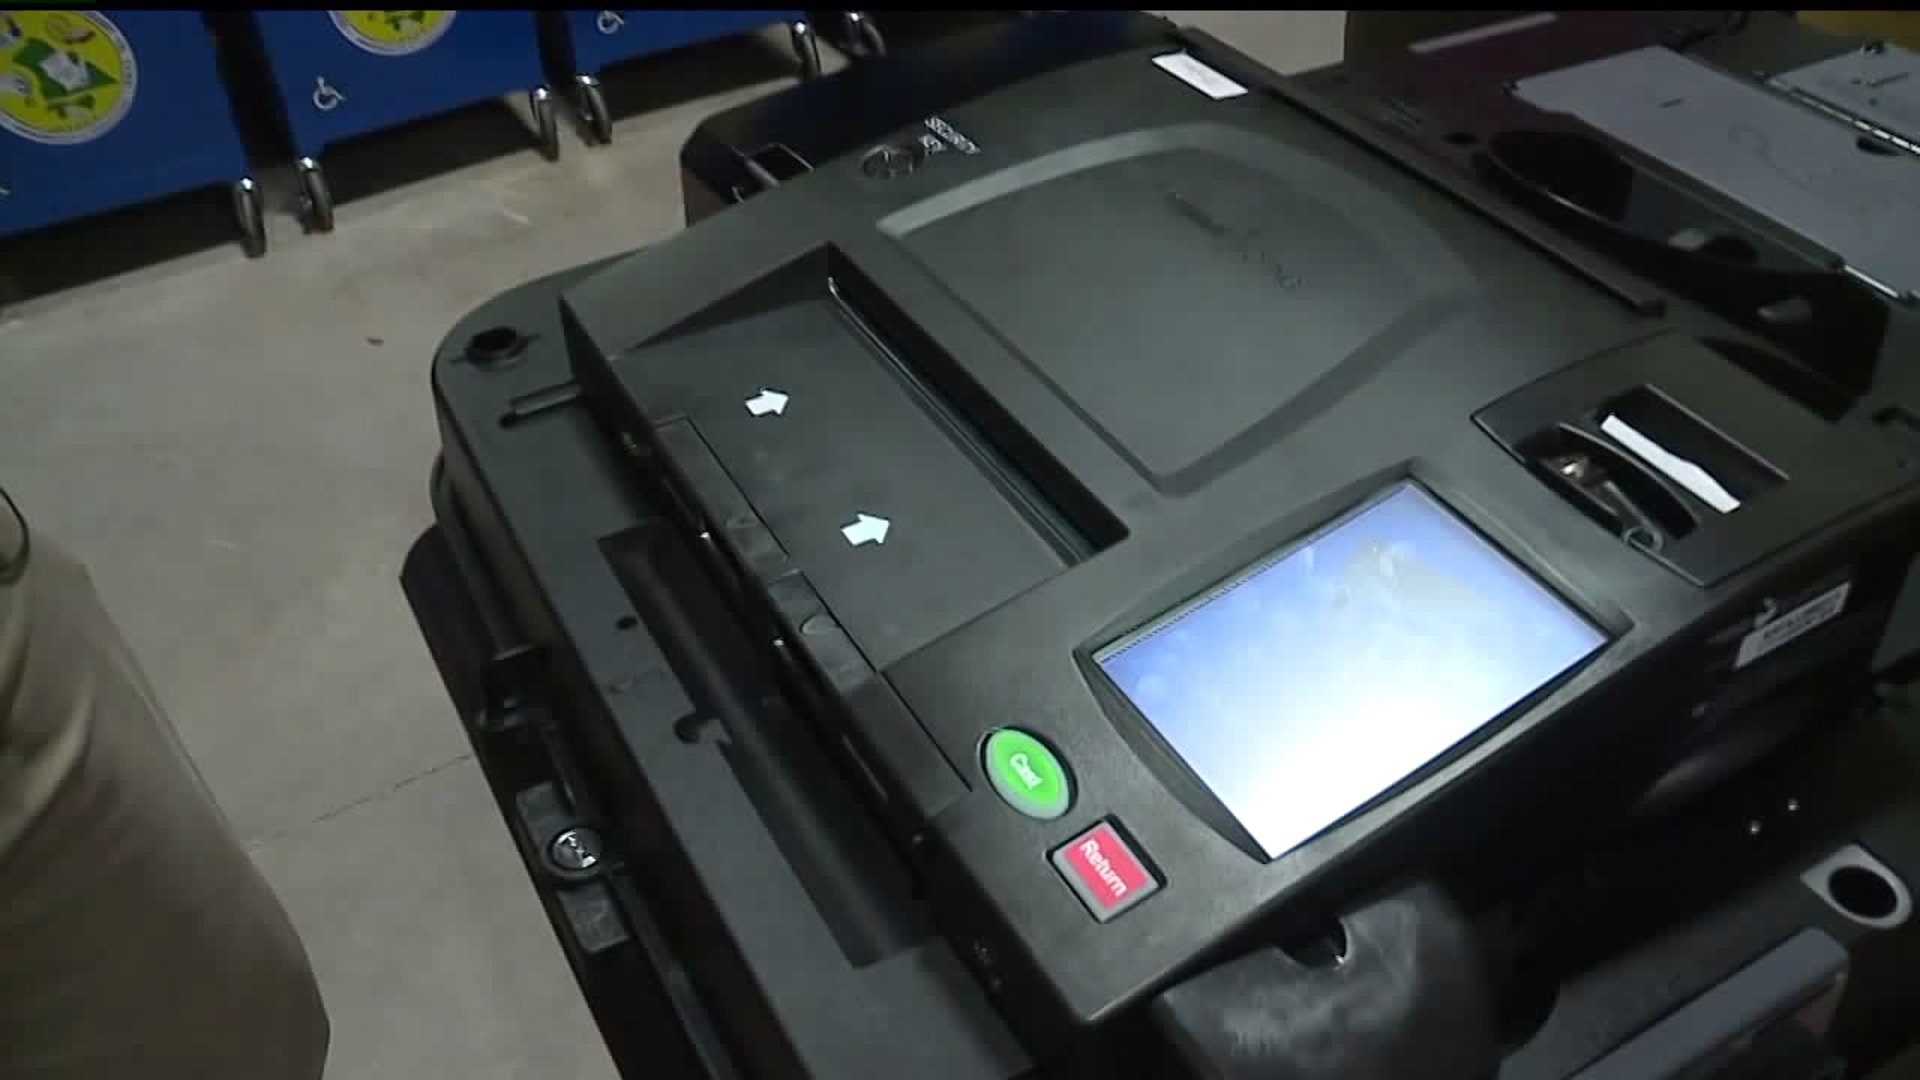 Pennsylvania Department of State addresses voting machine issues